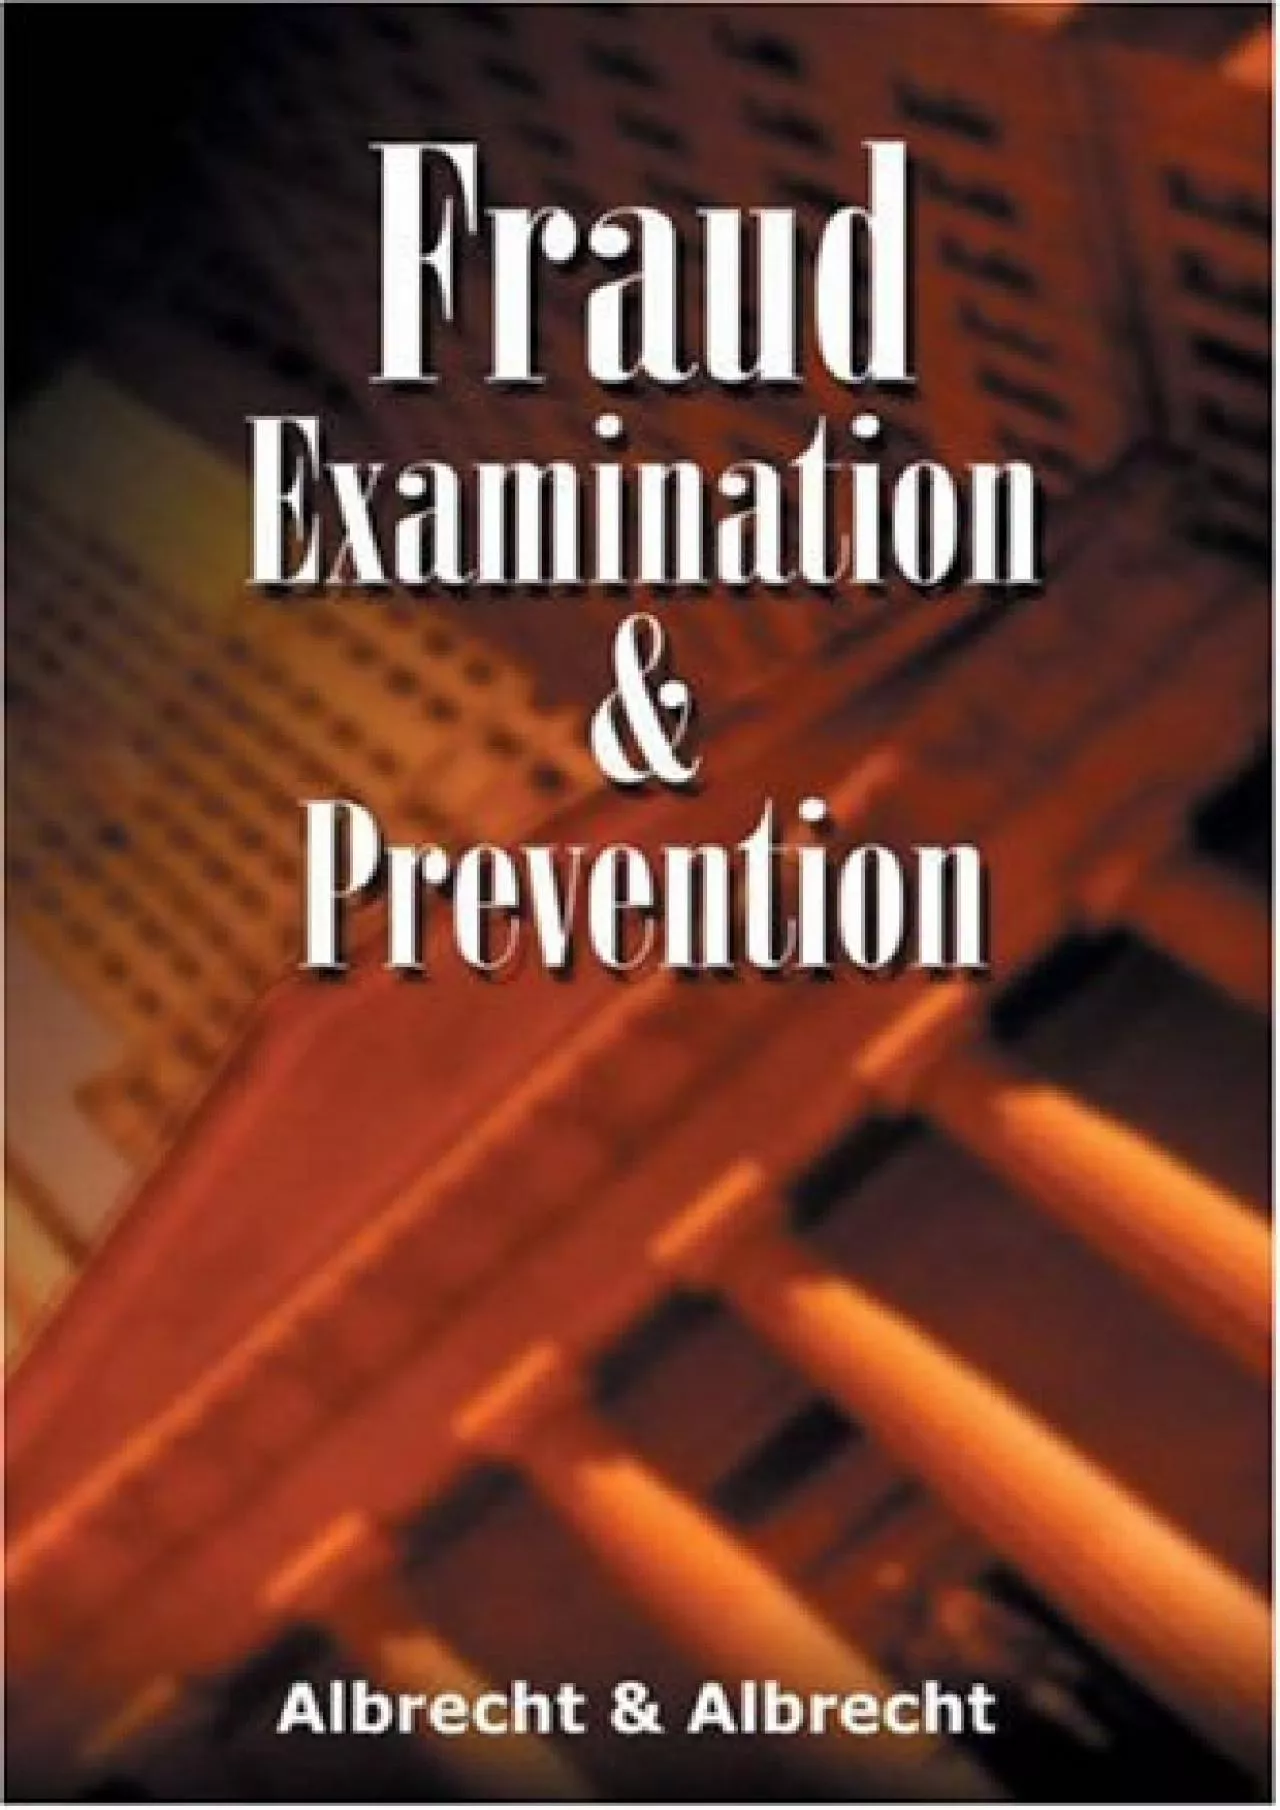 (DOWNLOAD)-Fraud Examination and Prevention